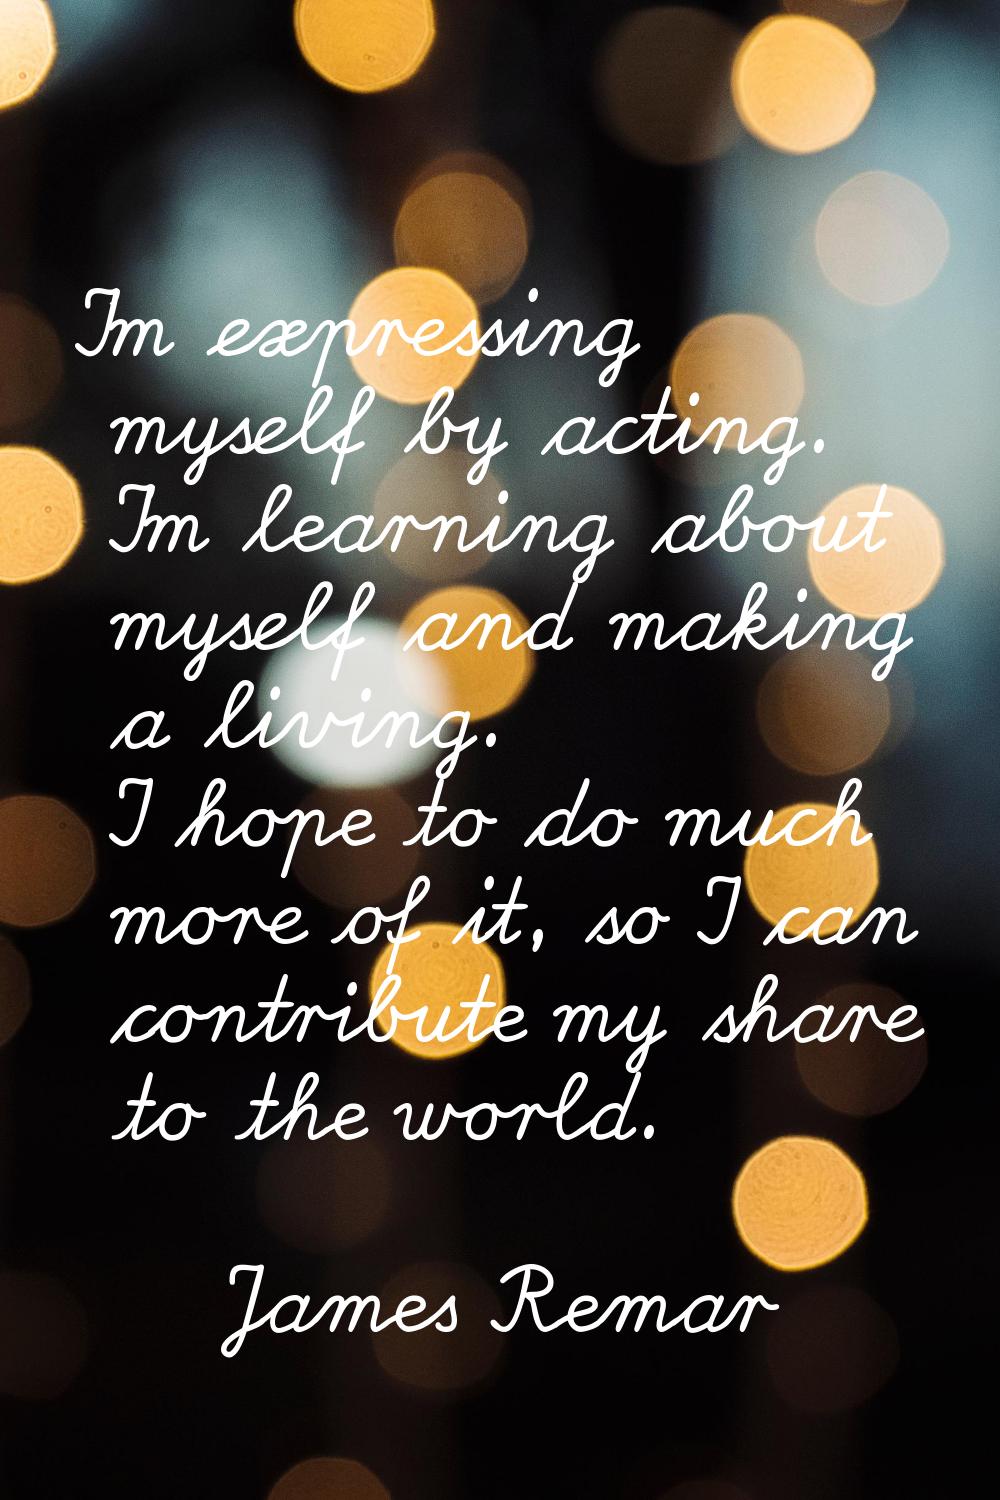 I'm expressing myself by acting. I'm learning about myself and making a living. I hope to do much m